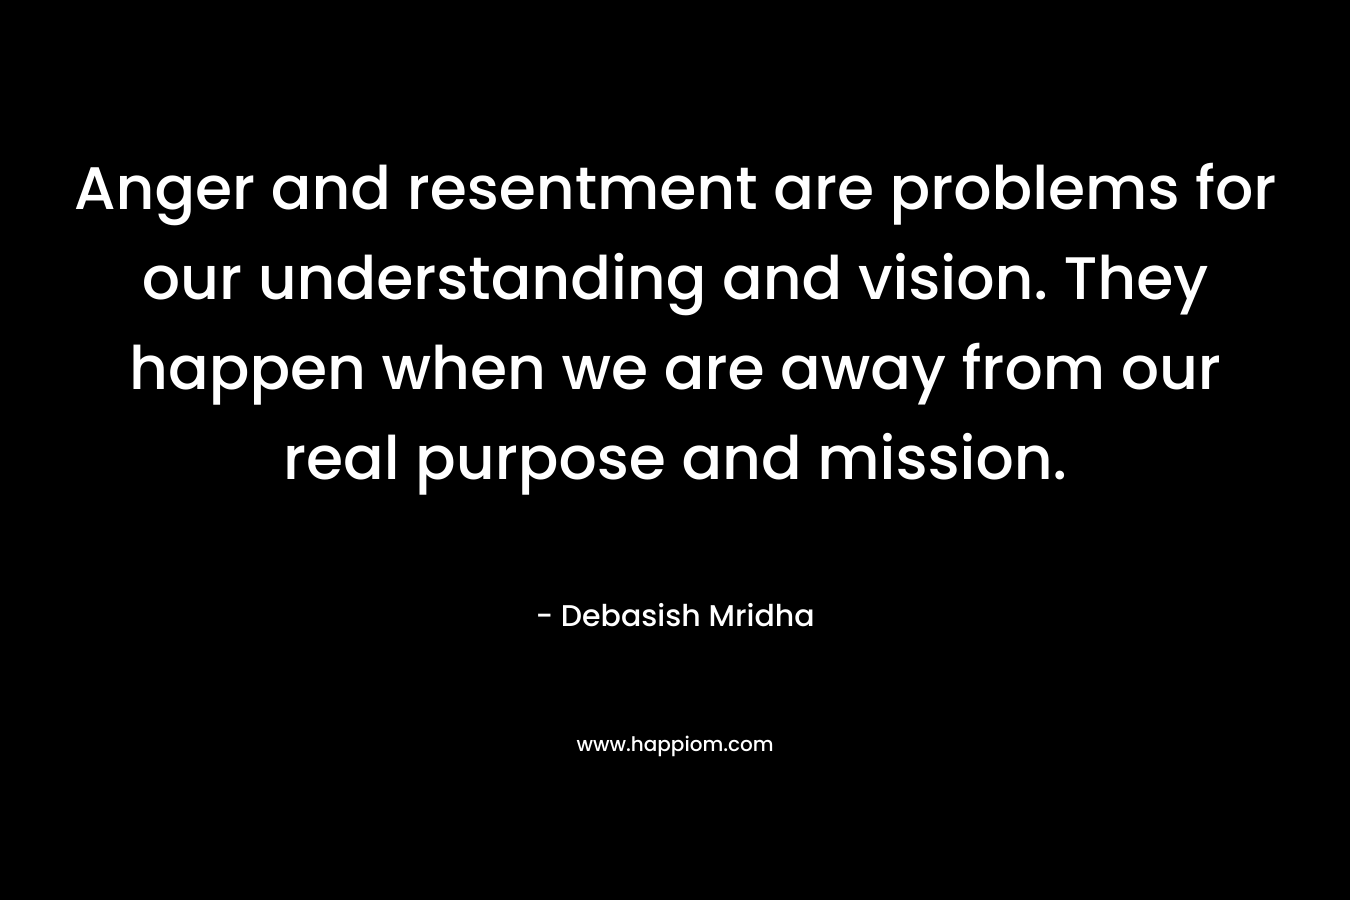 Anger and resentment are problems for our understanding and vision. They happen when we are away from our real purpose and mission.